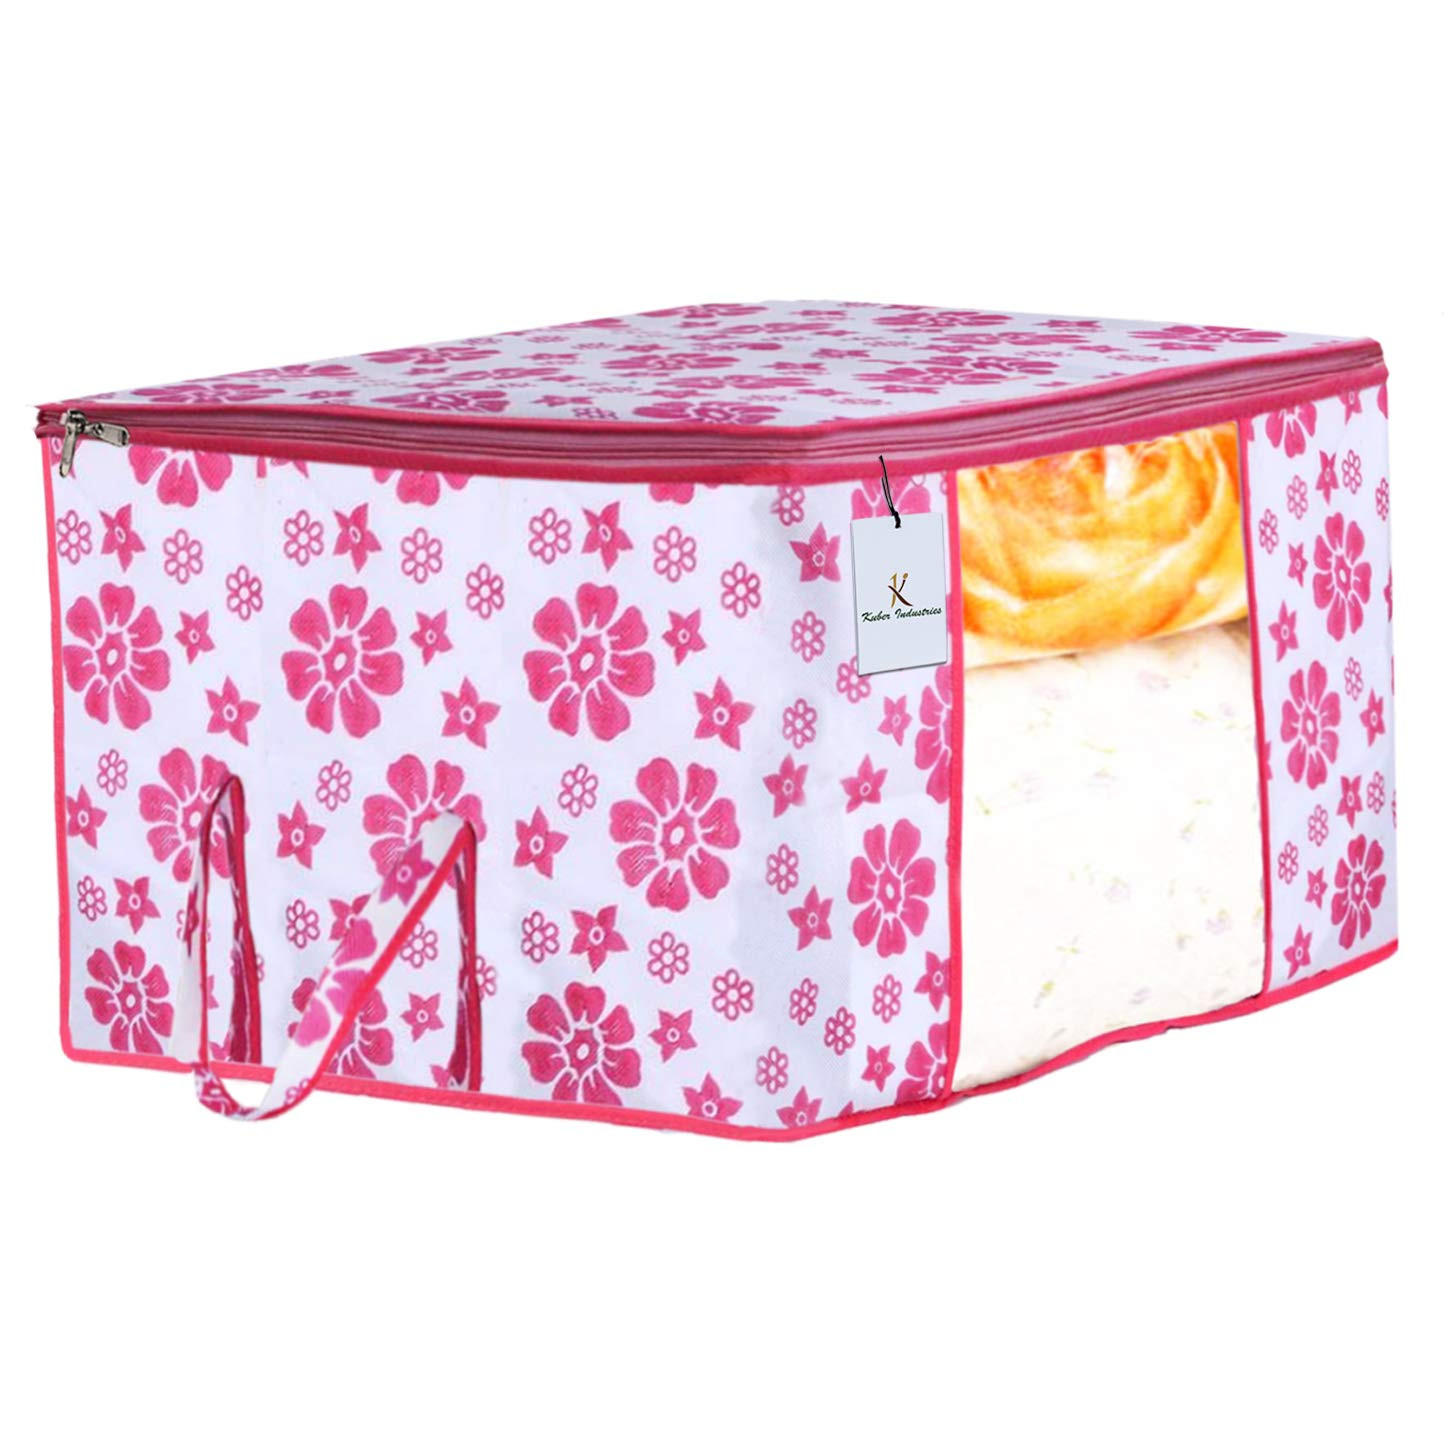 Kuber Industries Metalic & Flower Printed Non Woven Fabric Underbed Storage Bag,Cloth Organiser,Blanket Cover with Transparent Window, Pink & Blue & Ivory Red & Golden Brown -CTKTC41123